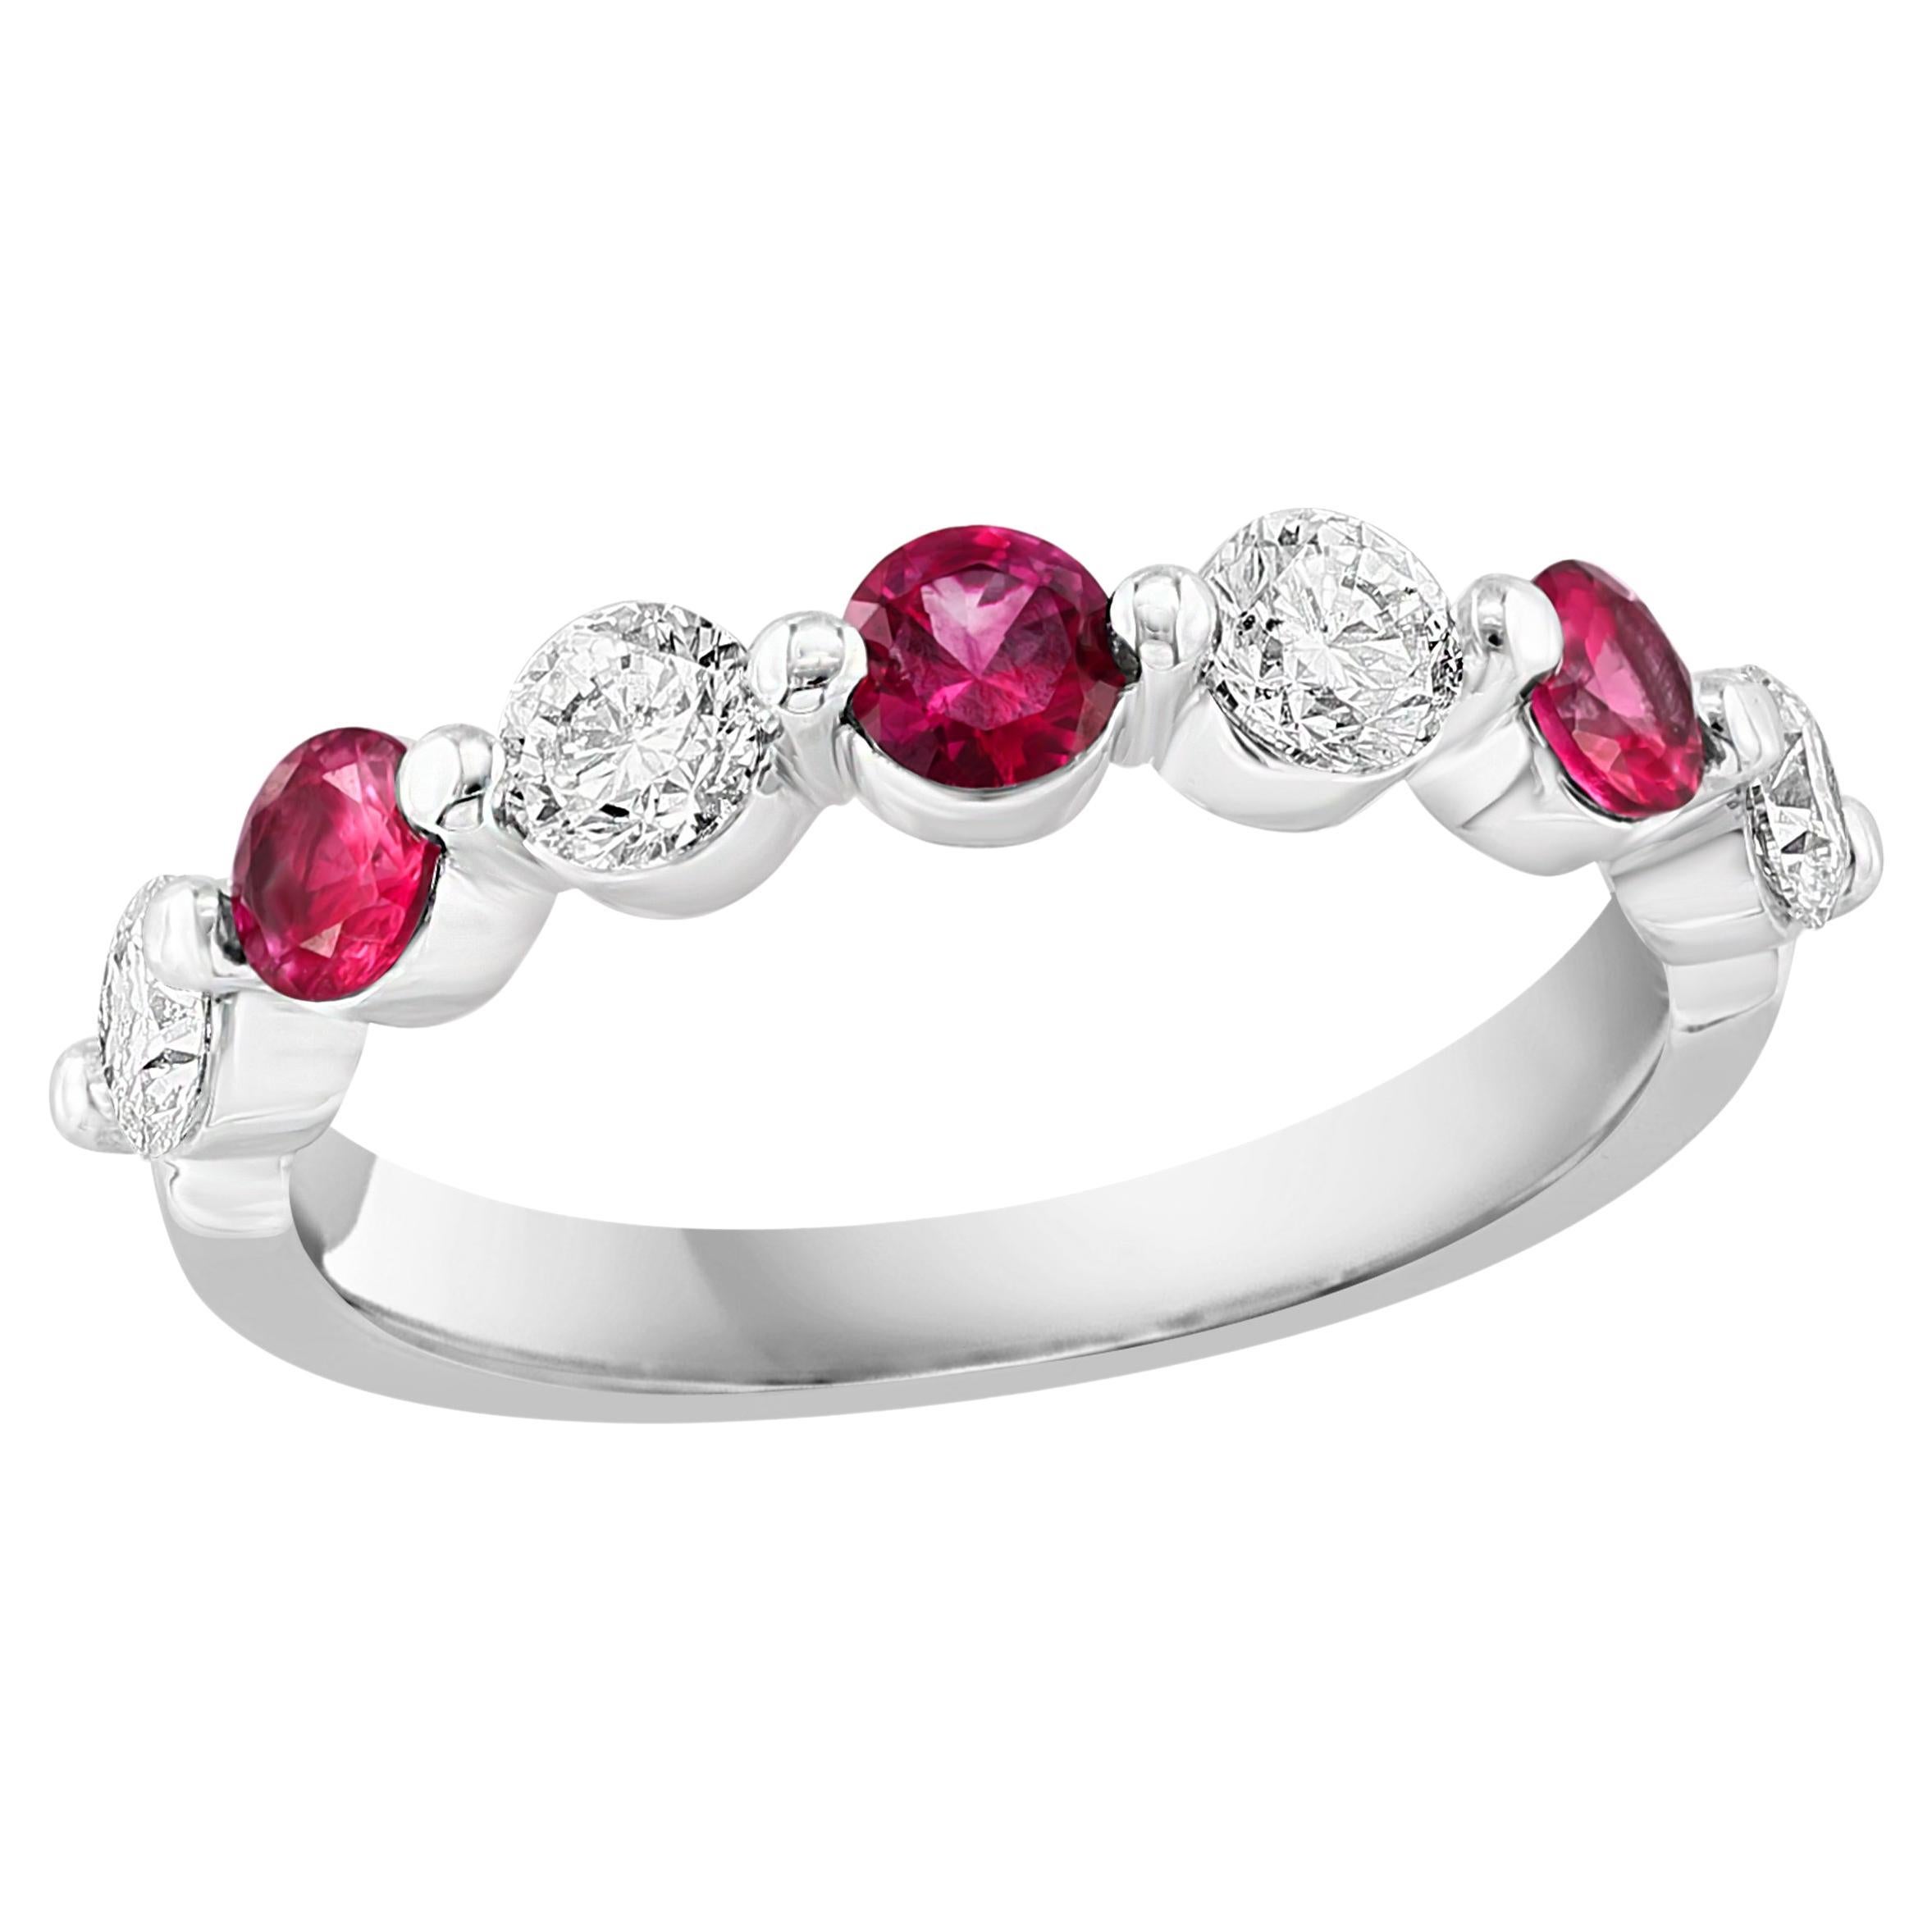 0.52 Carat Brilliant Cut Ruby and Diamond 7 Stone Wedding Band in 14K White Gold